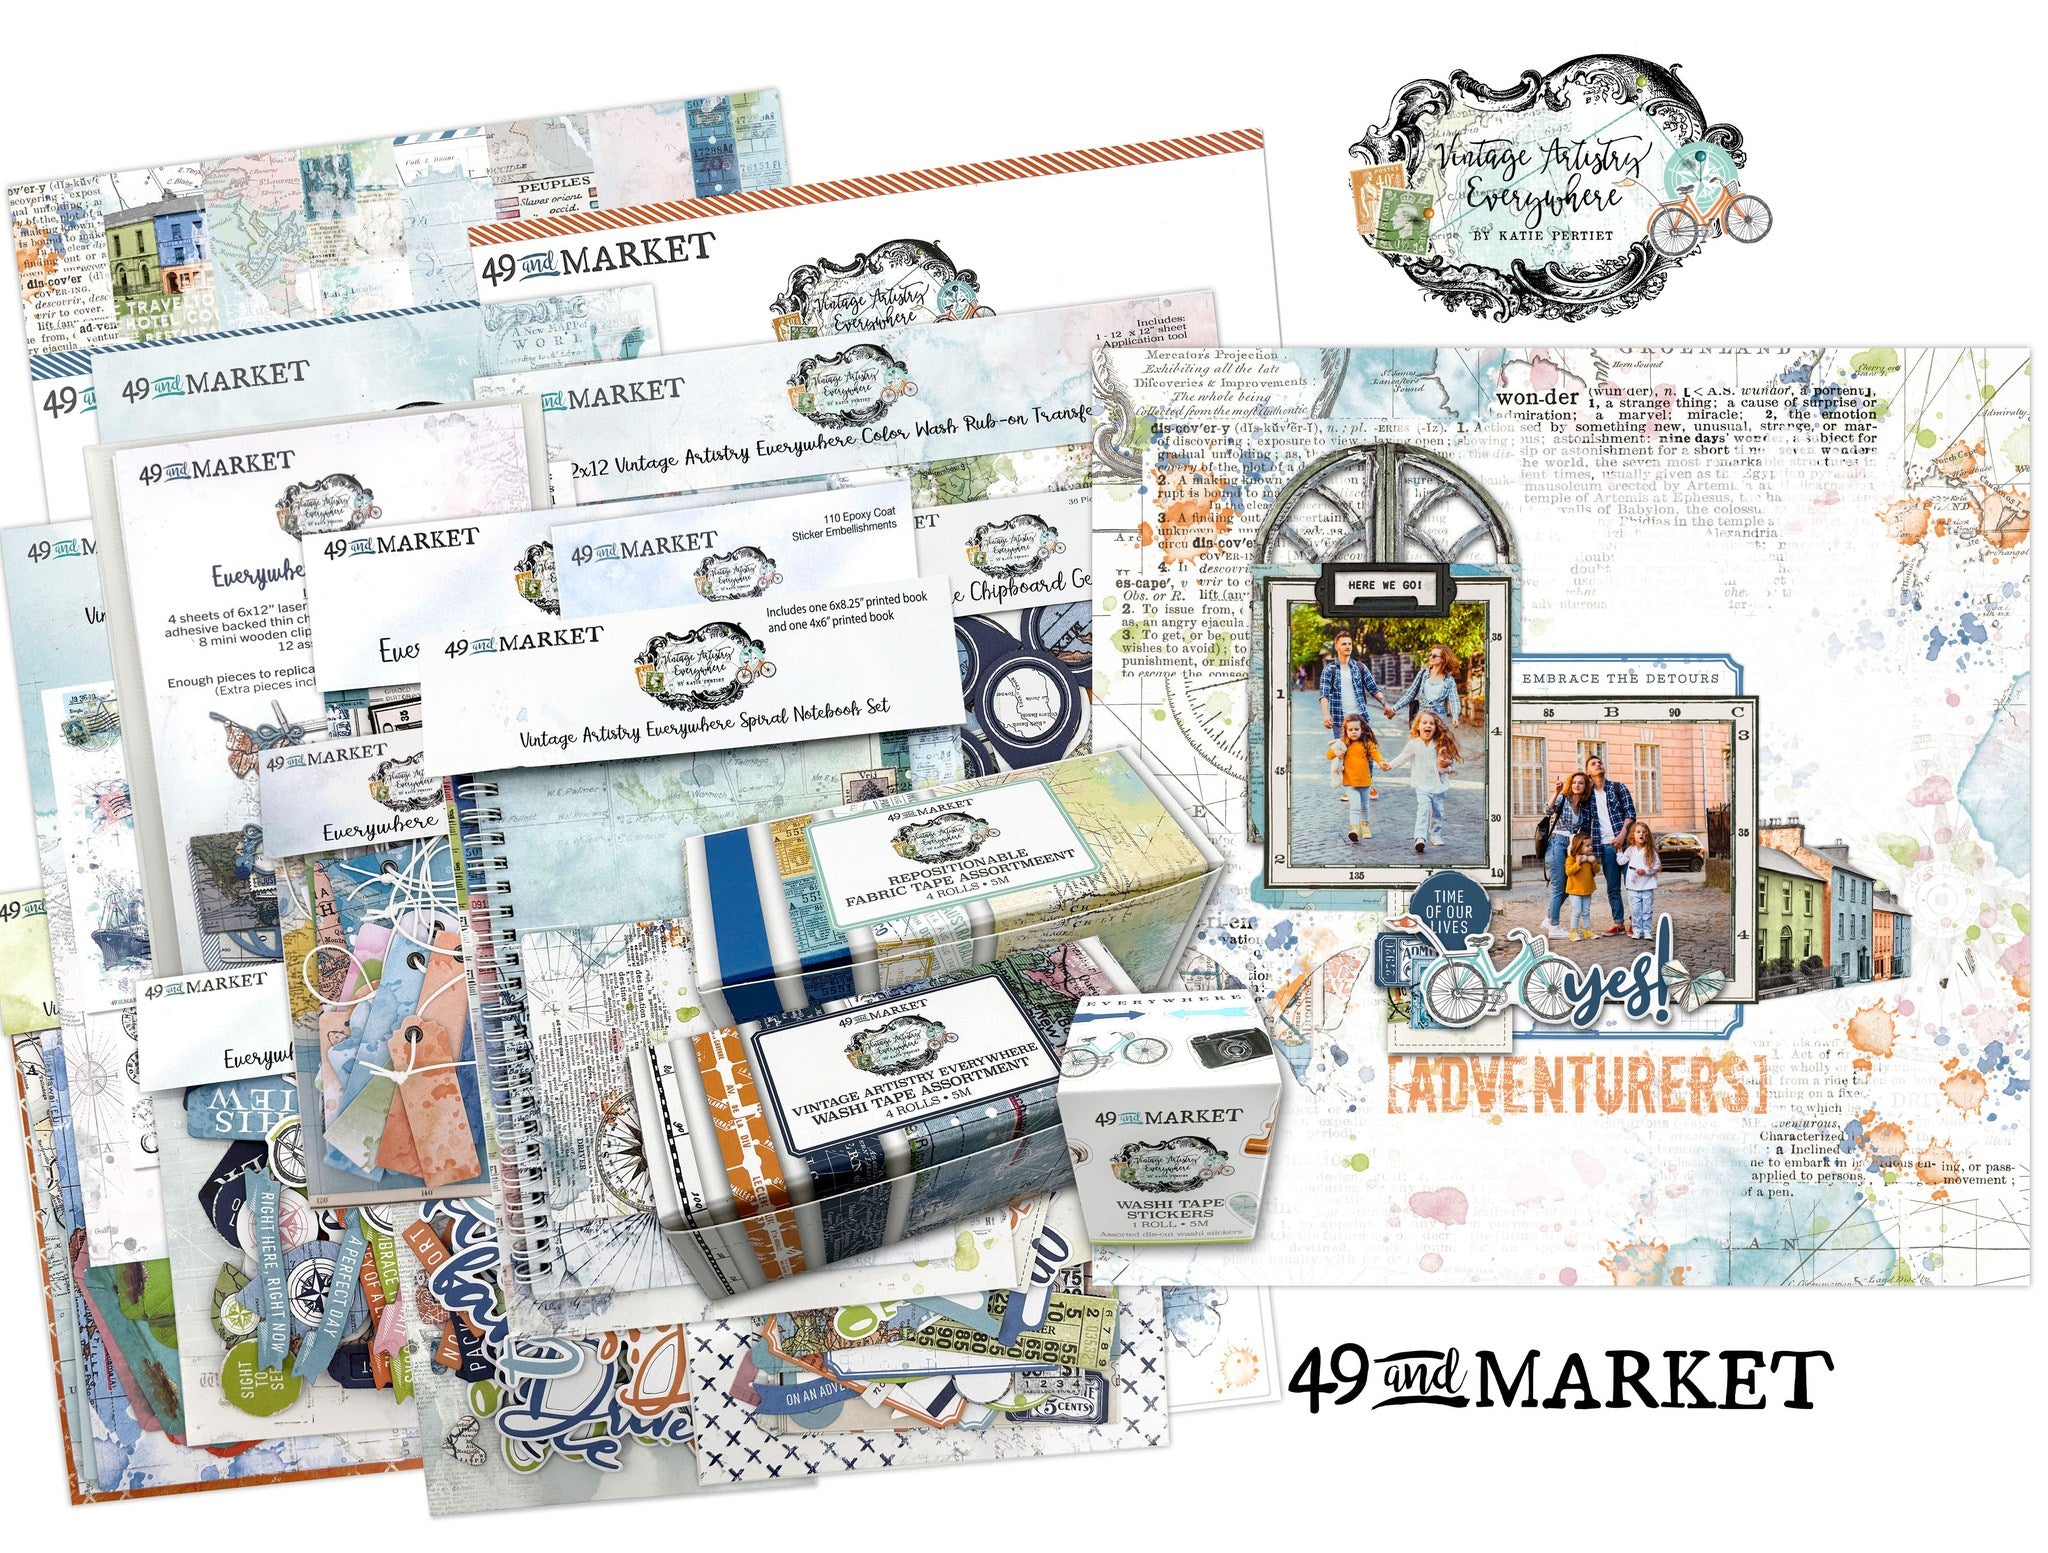 49 and Market Vintage Artistry Anywhere Chipboard Stickers